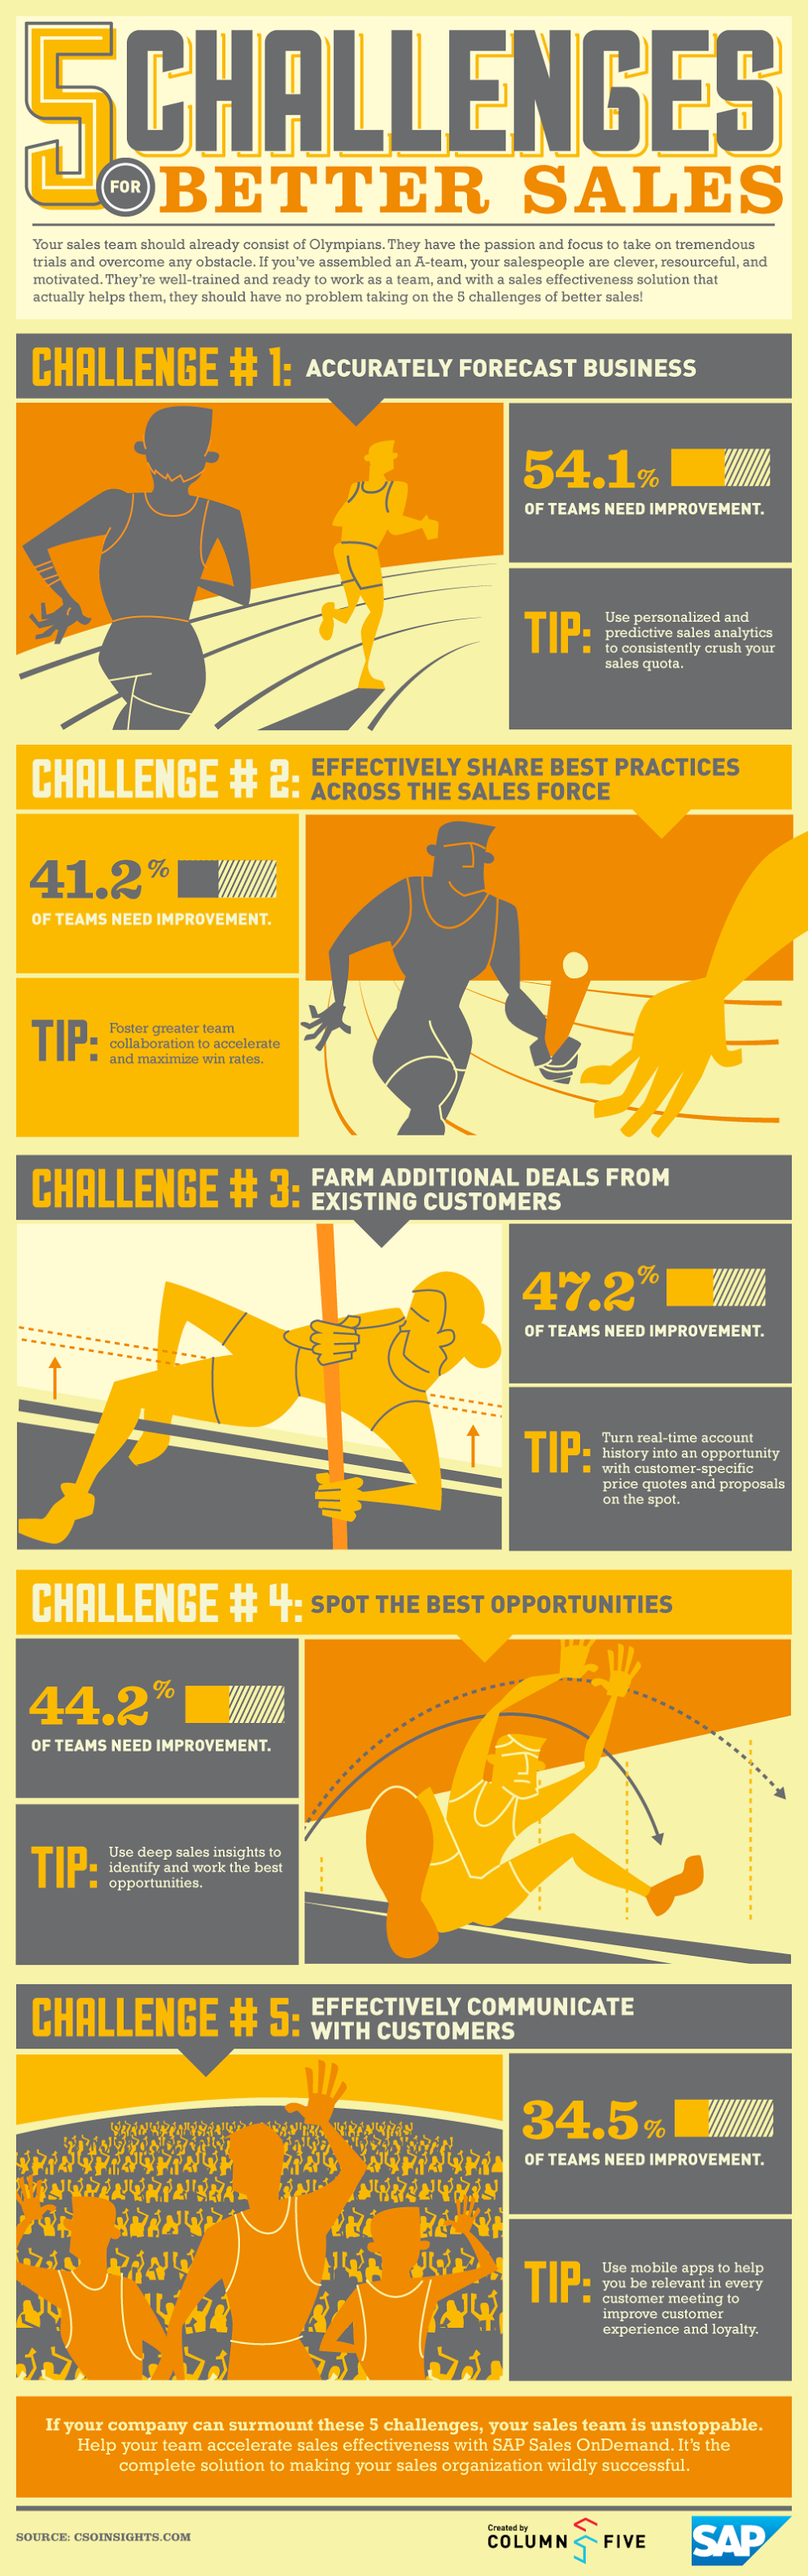 5 Challenges for Better Sales Team [infographic]